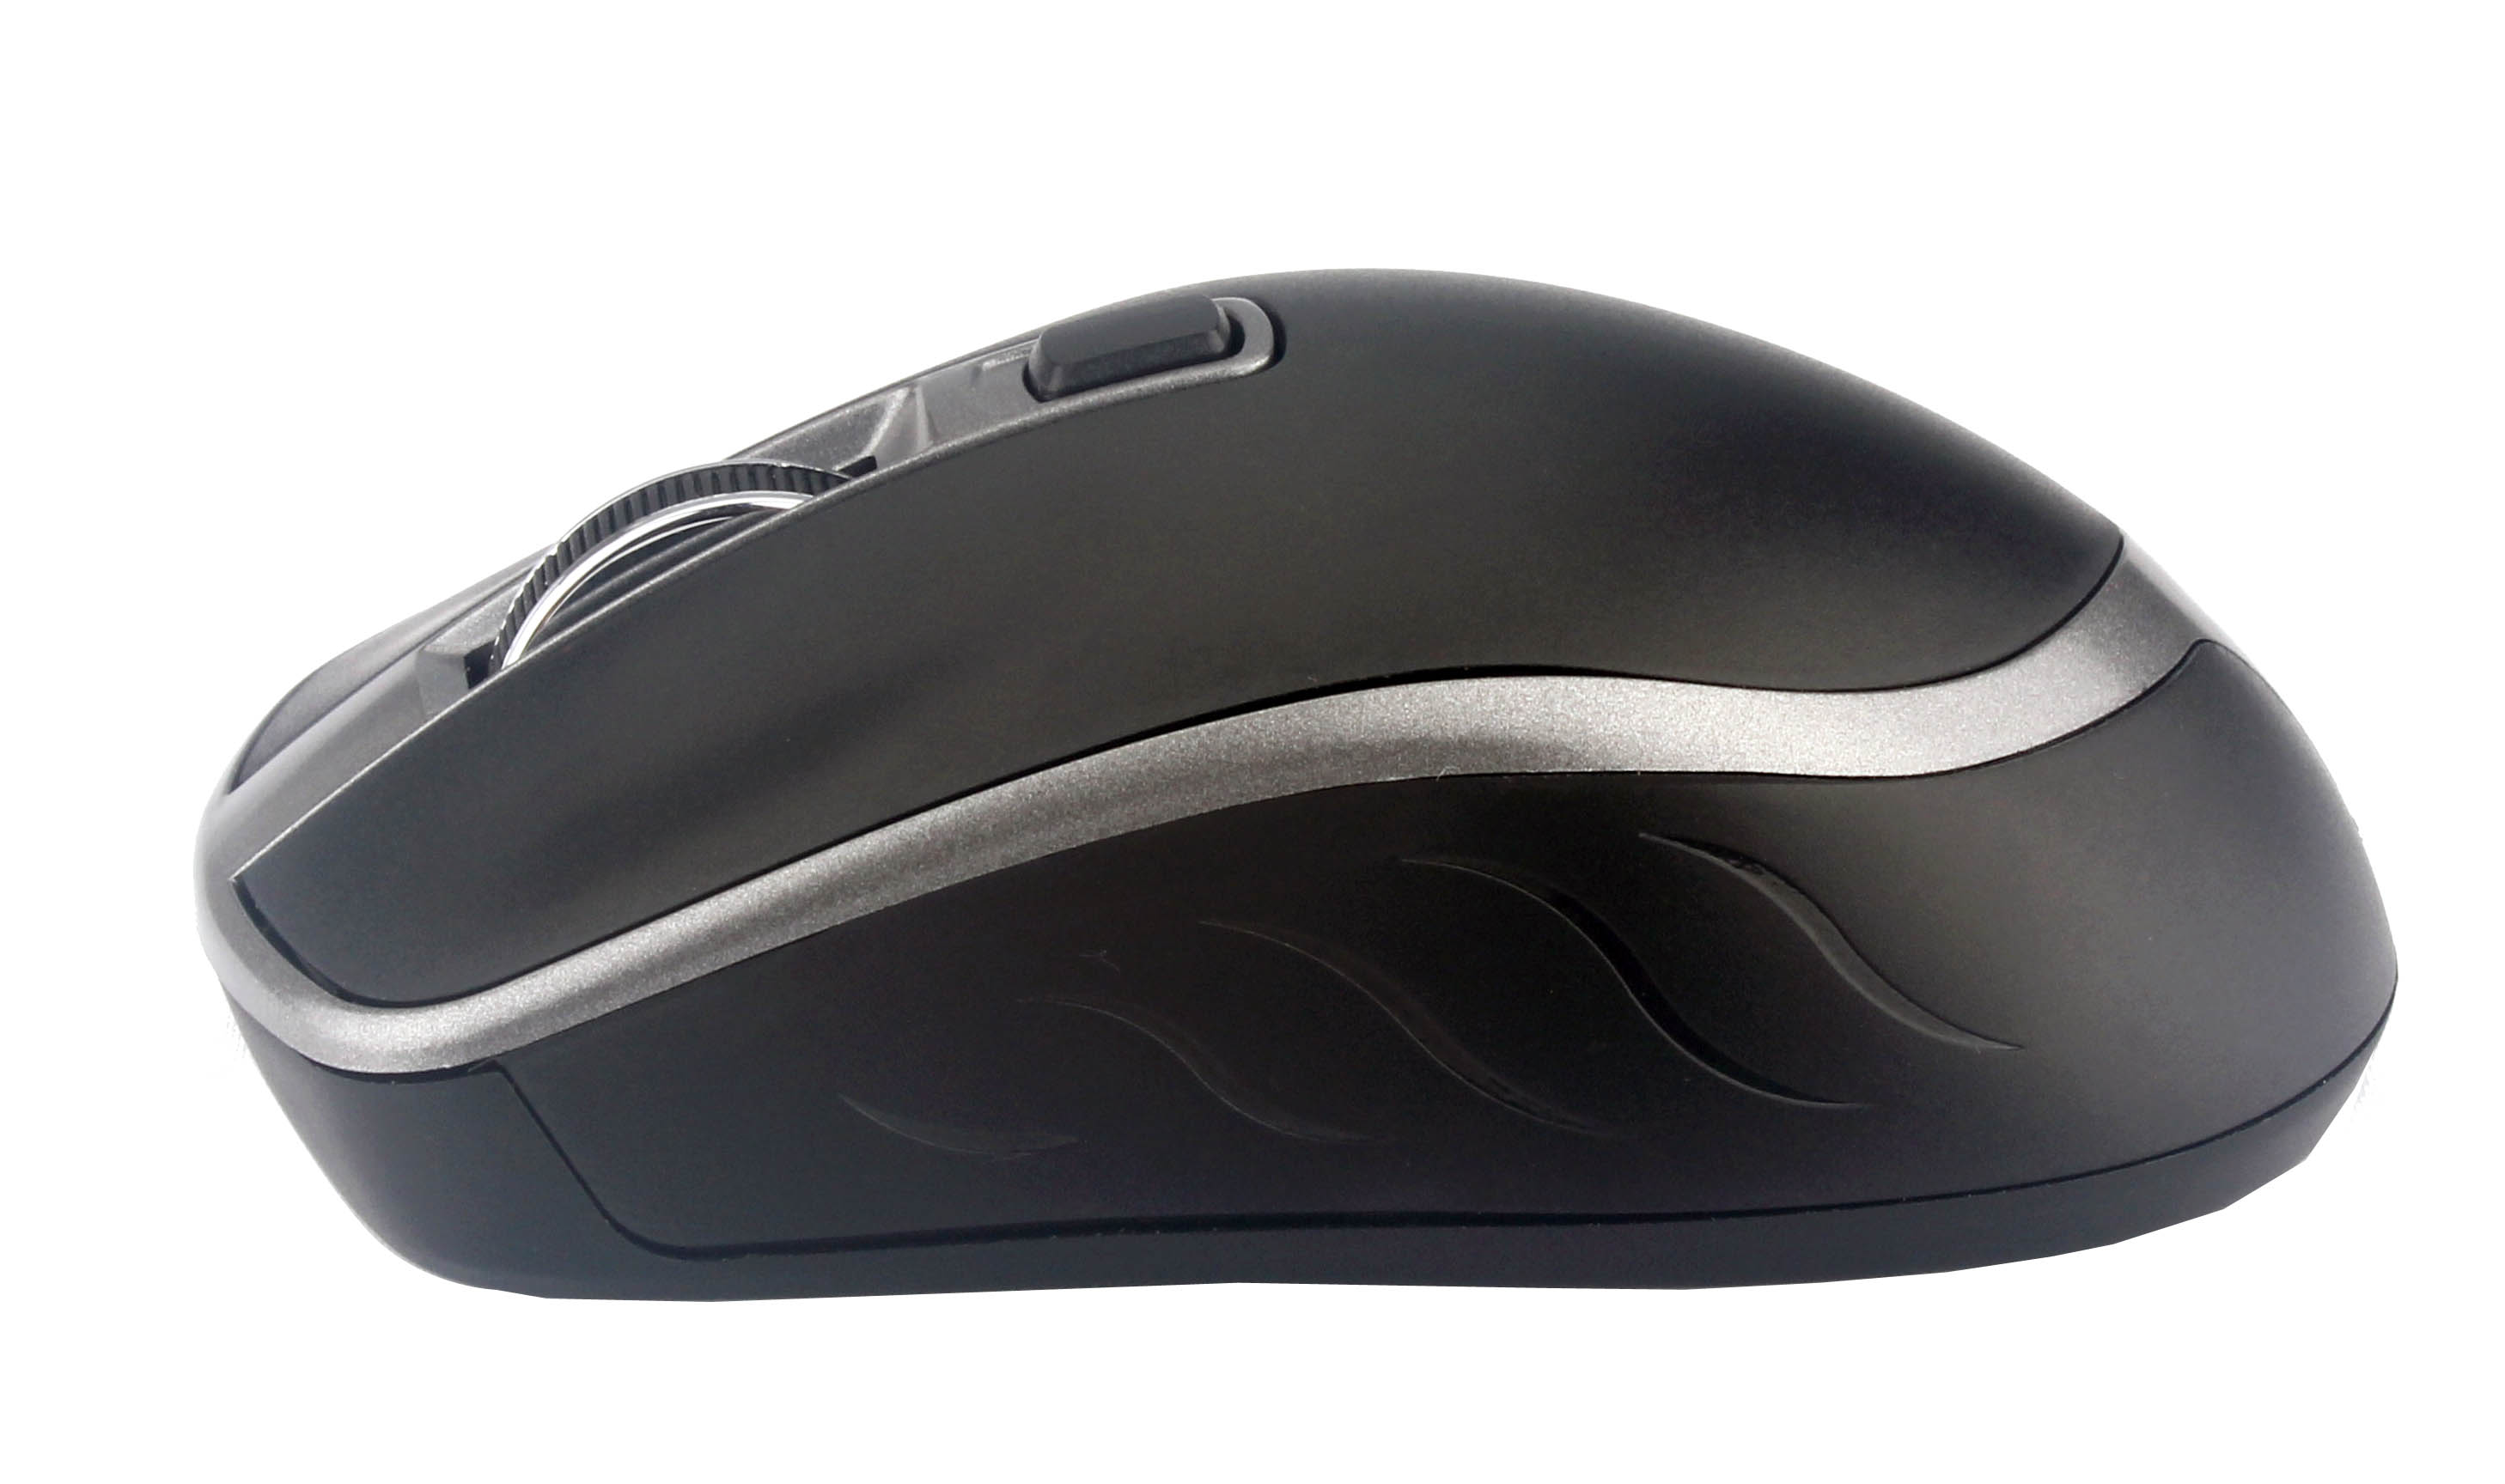 New Wireless Mouse For Year 2020,Private Model,800/1200/1600 DPI,Scroll Electroplated